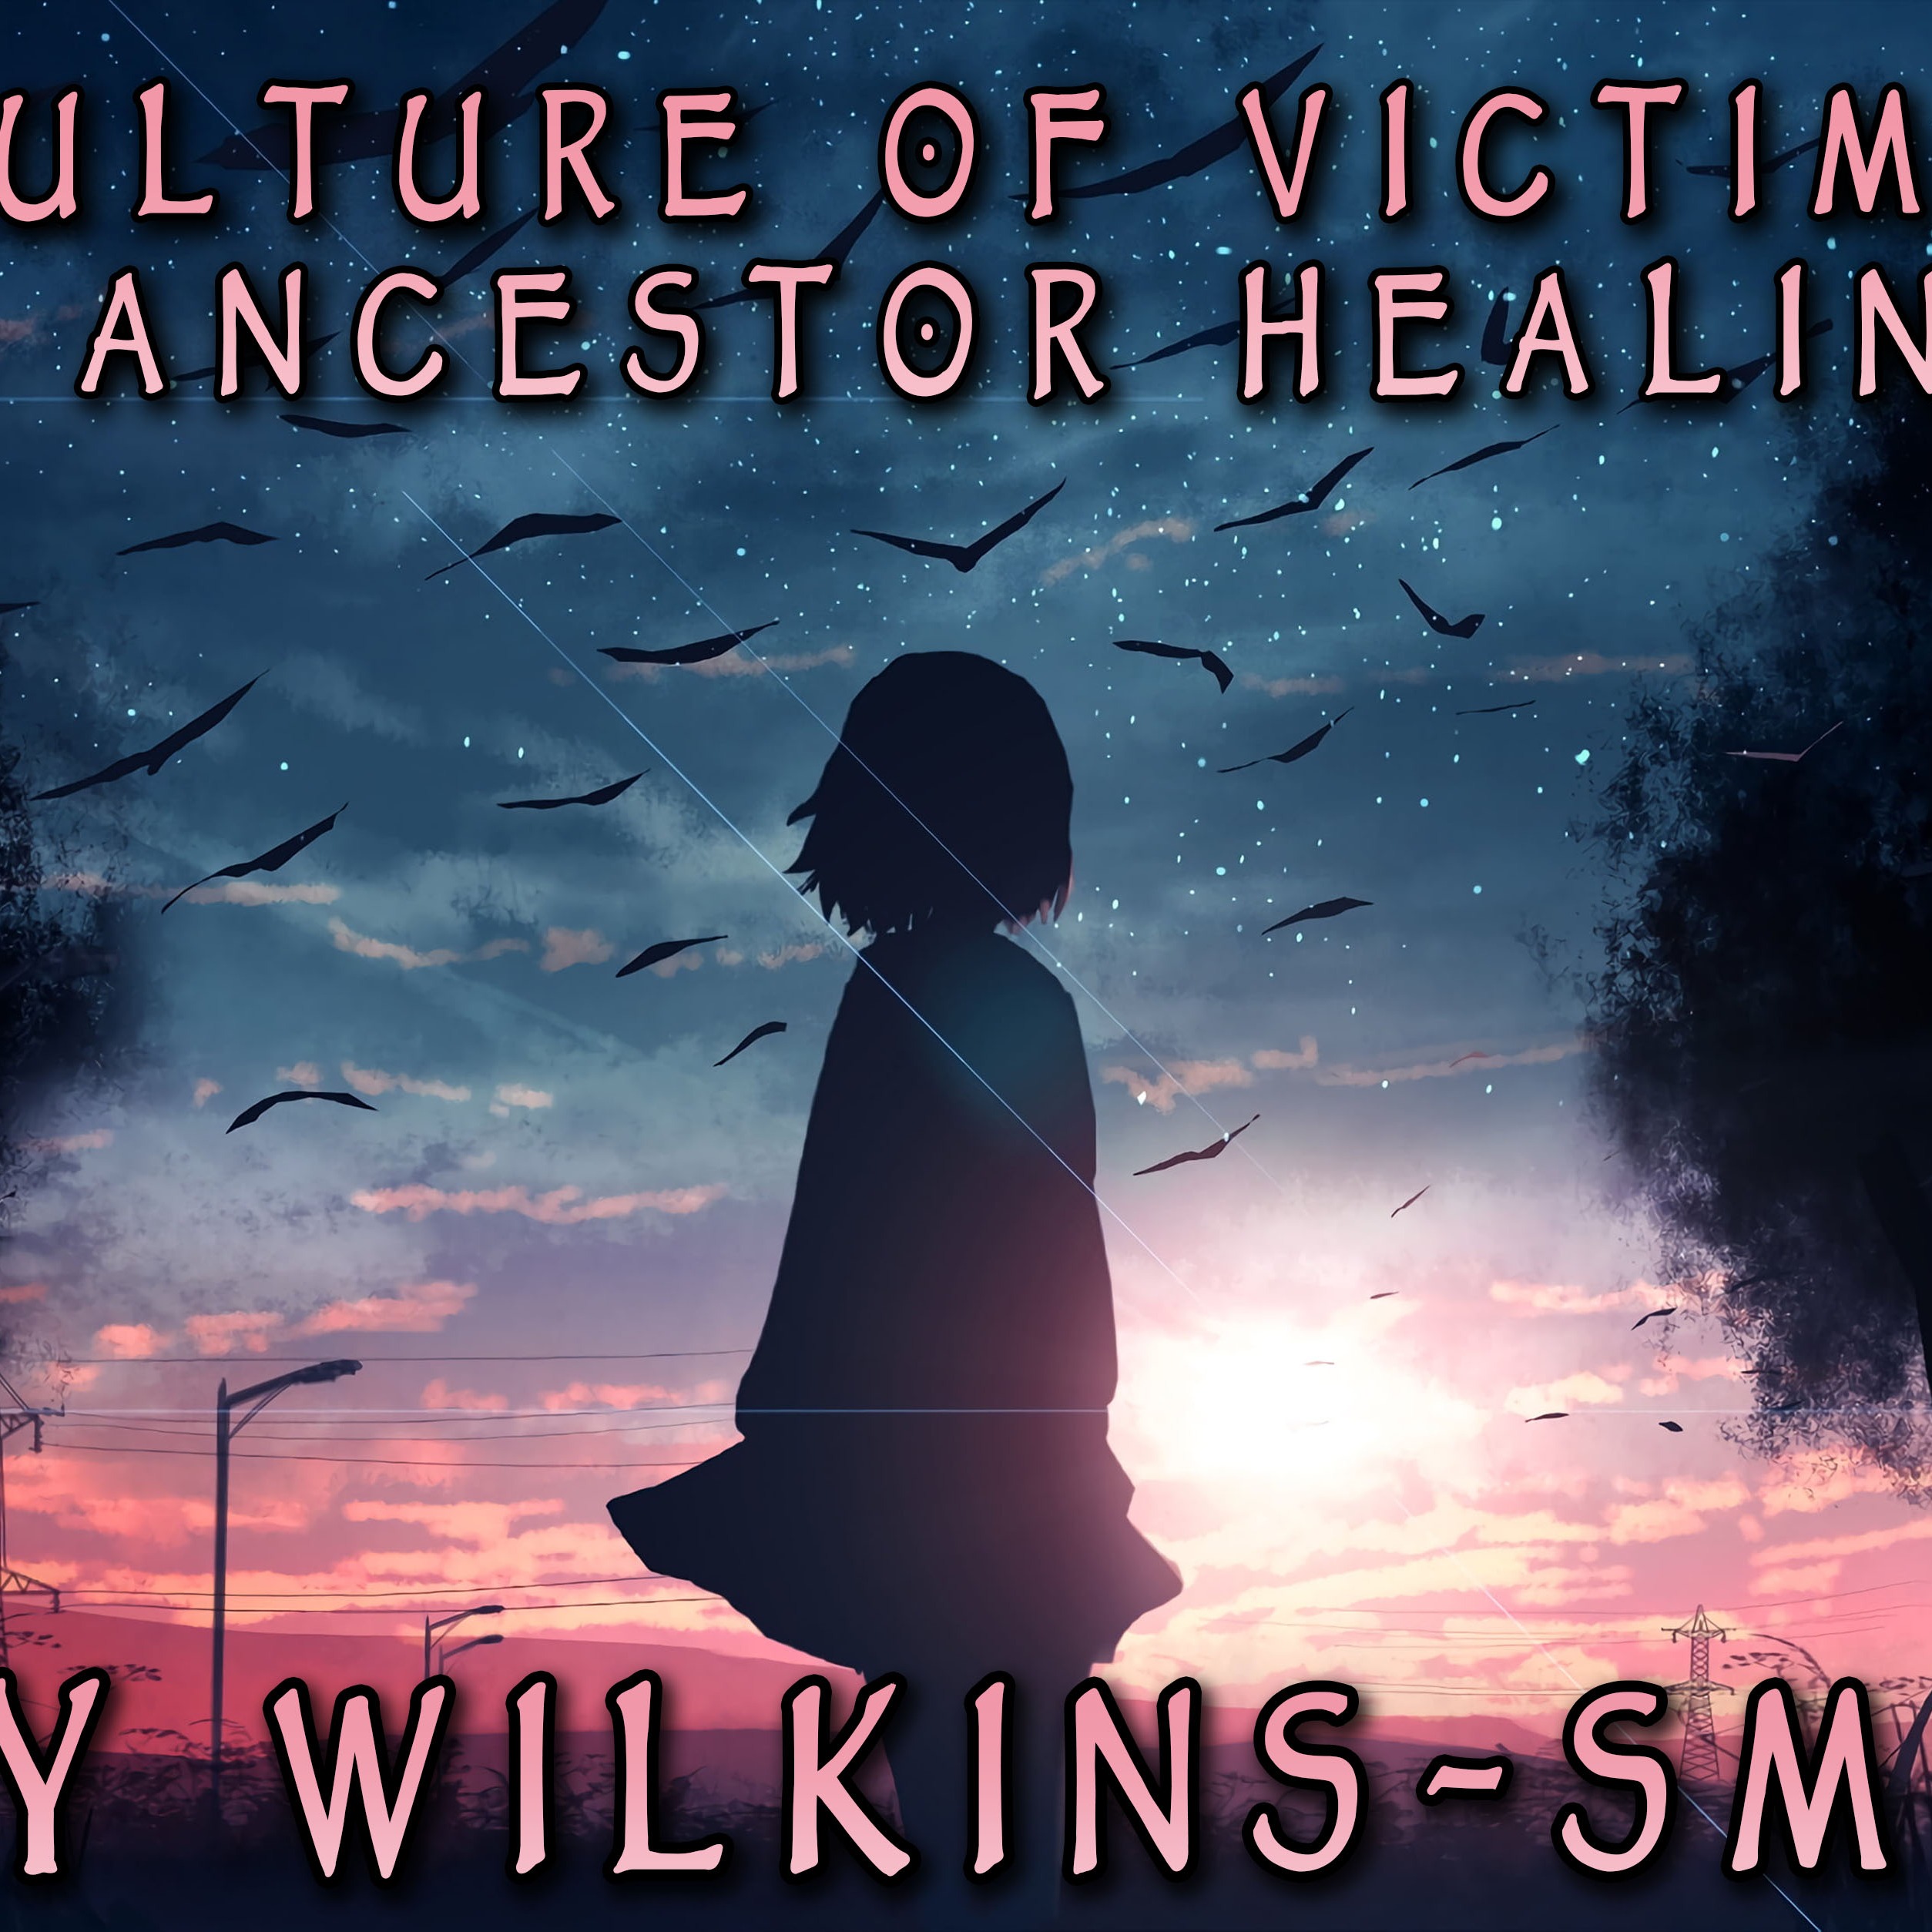 Judy Wilkins-Smith on The Culture of Victimhood & Ancestor Healing